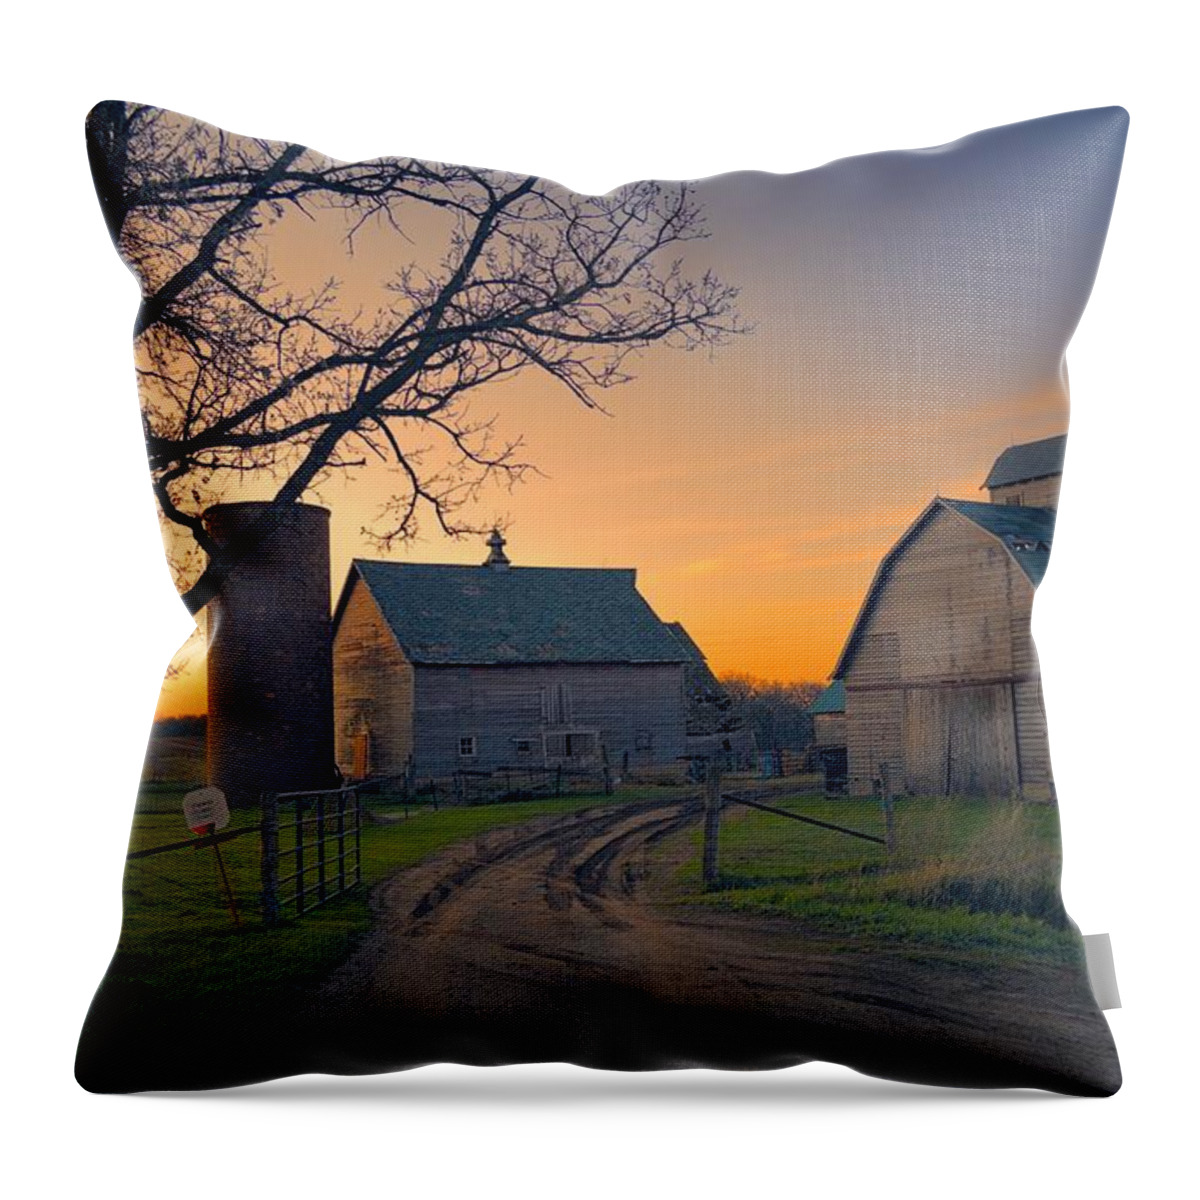 Rustic Throw Pillow featuring the photograph Birch Barn 2 by Bonfire Photography